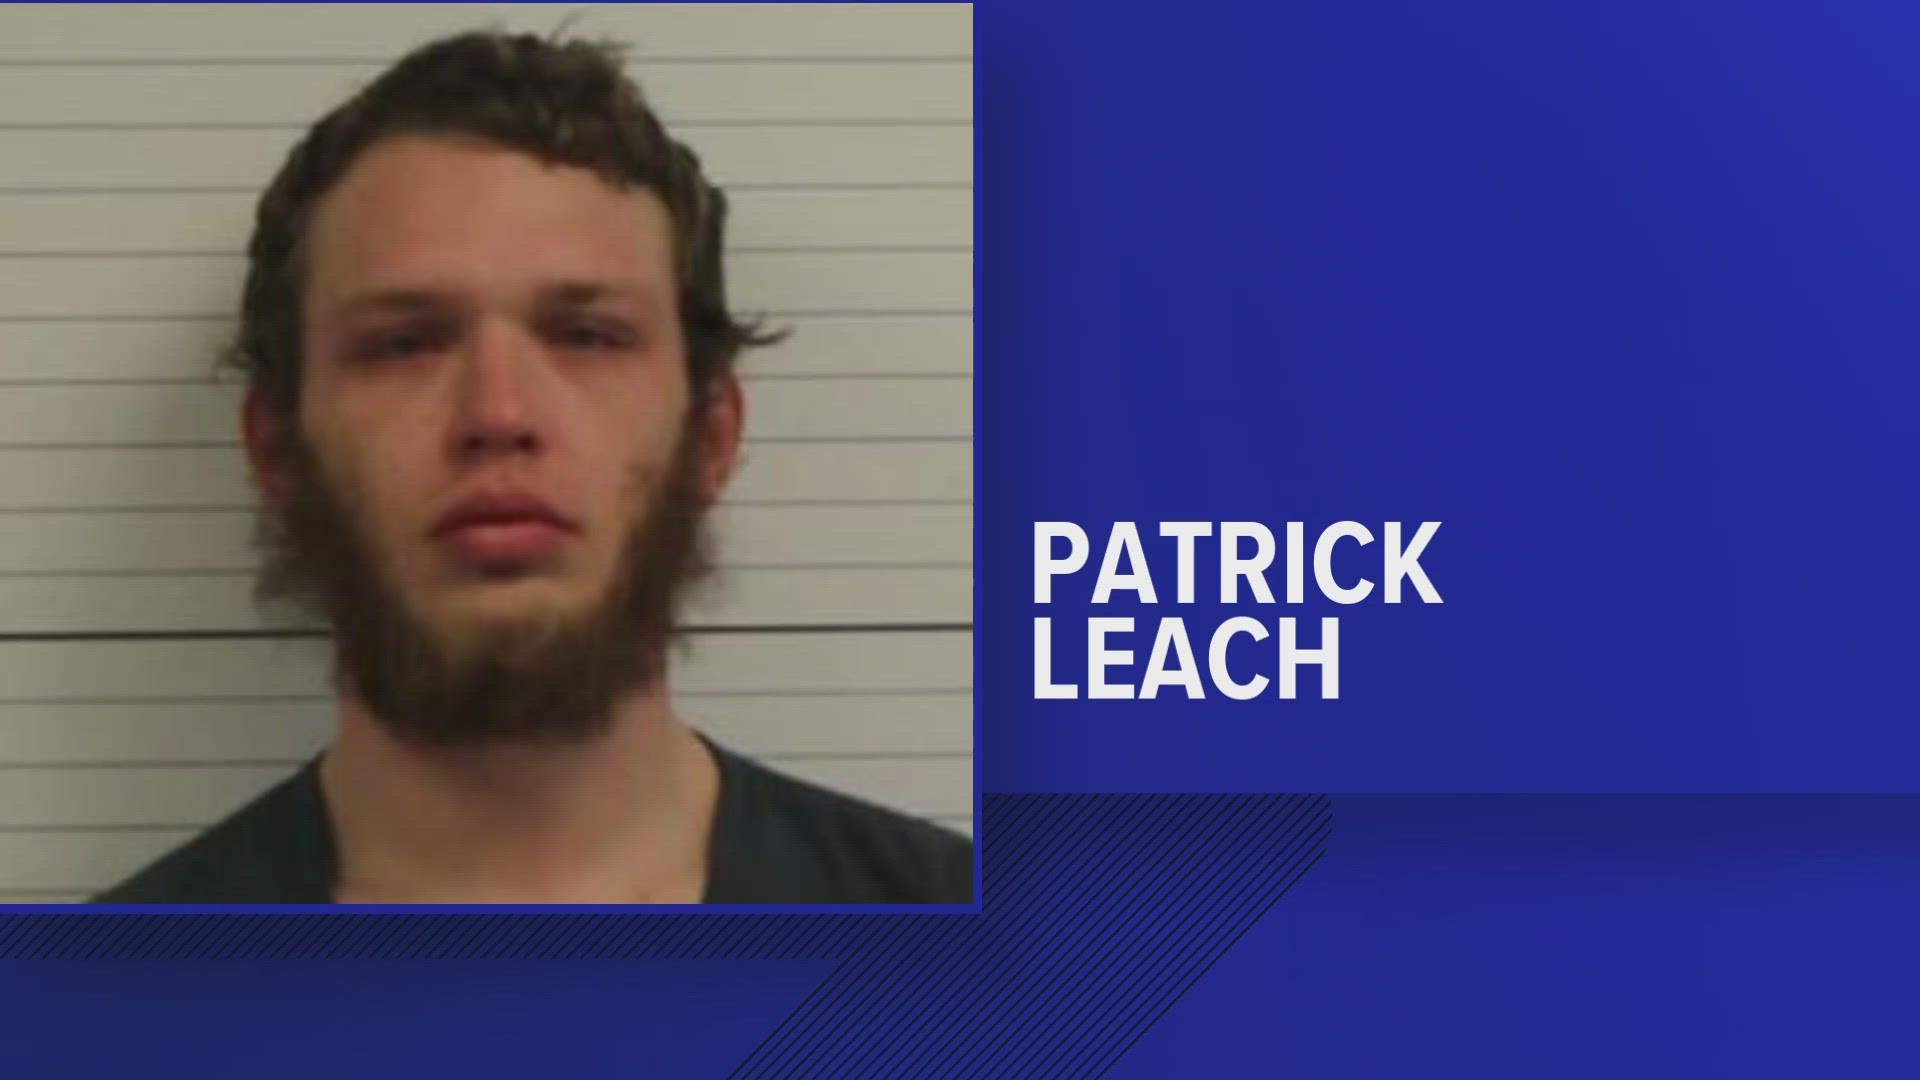 The Campbell County Sheriff's Office said Patrick Scott Leach from LaFollette told deputies he opened around 30 mailboxes from various addresses.